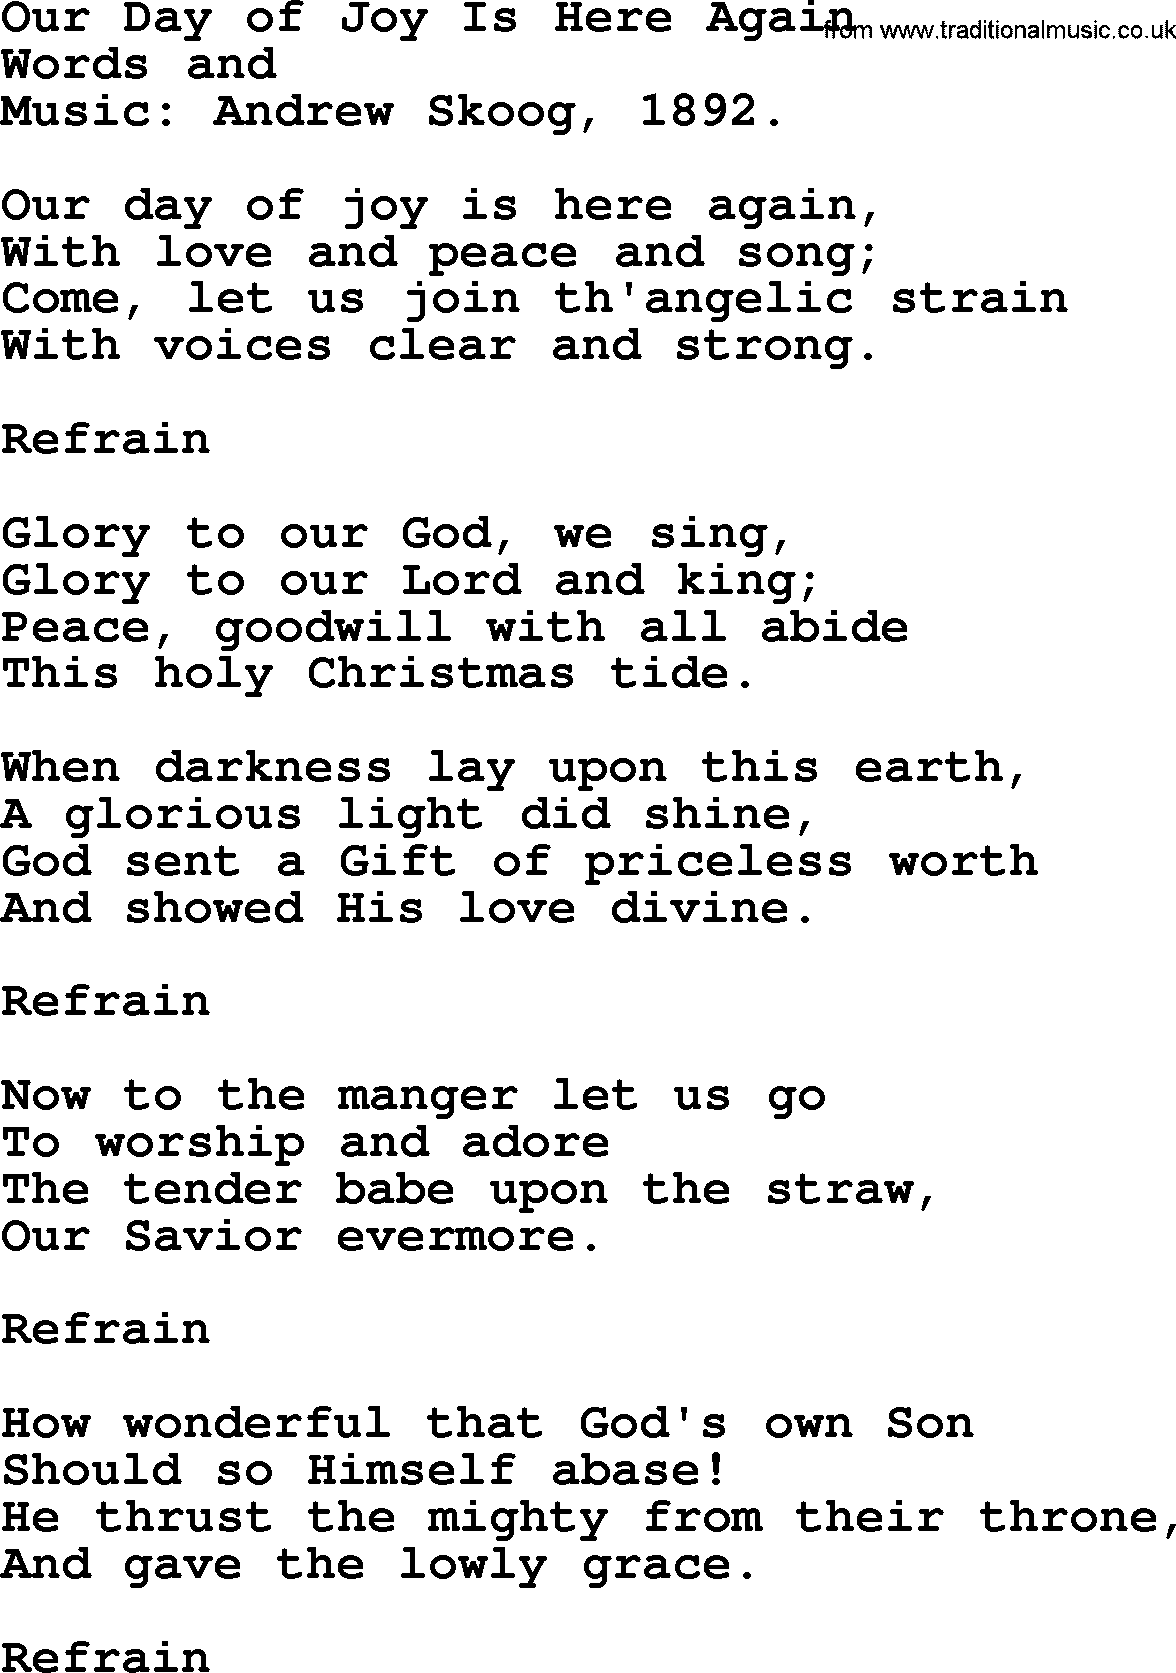 Christmas Hymns, Carols and Songs, title: Our Day Of Joy Is Here Again - complete lyrics, and PDF